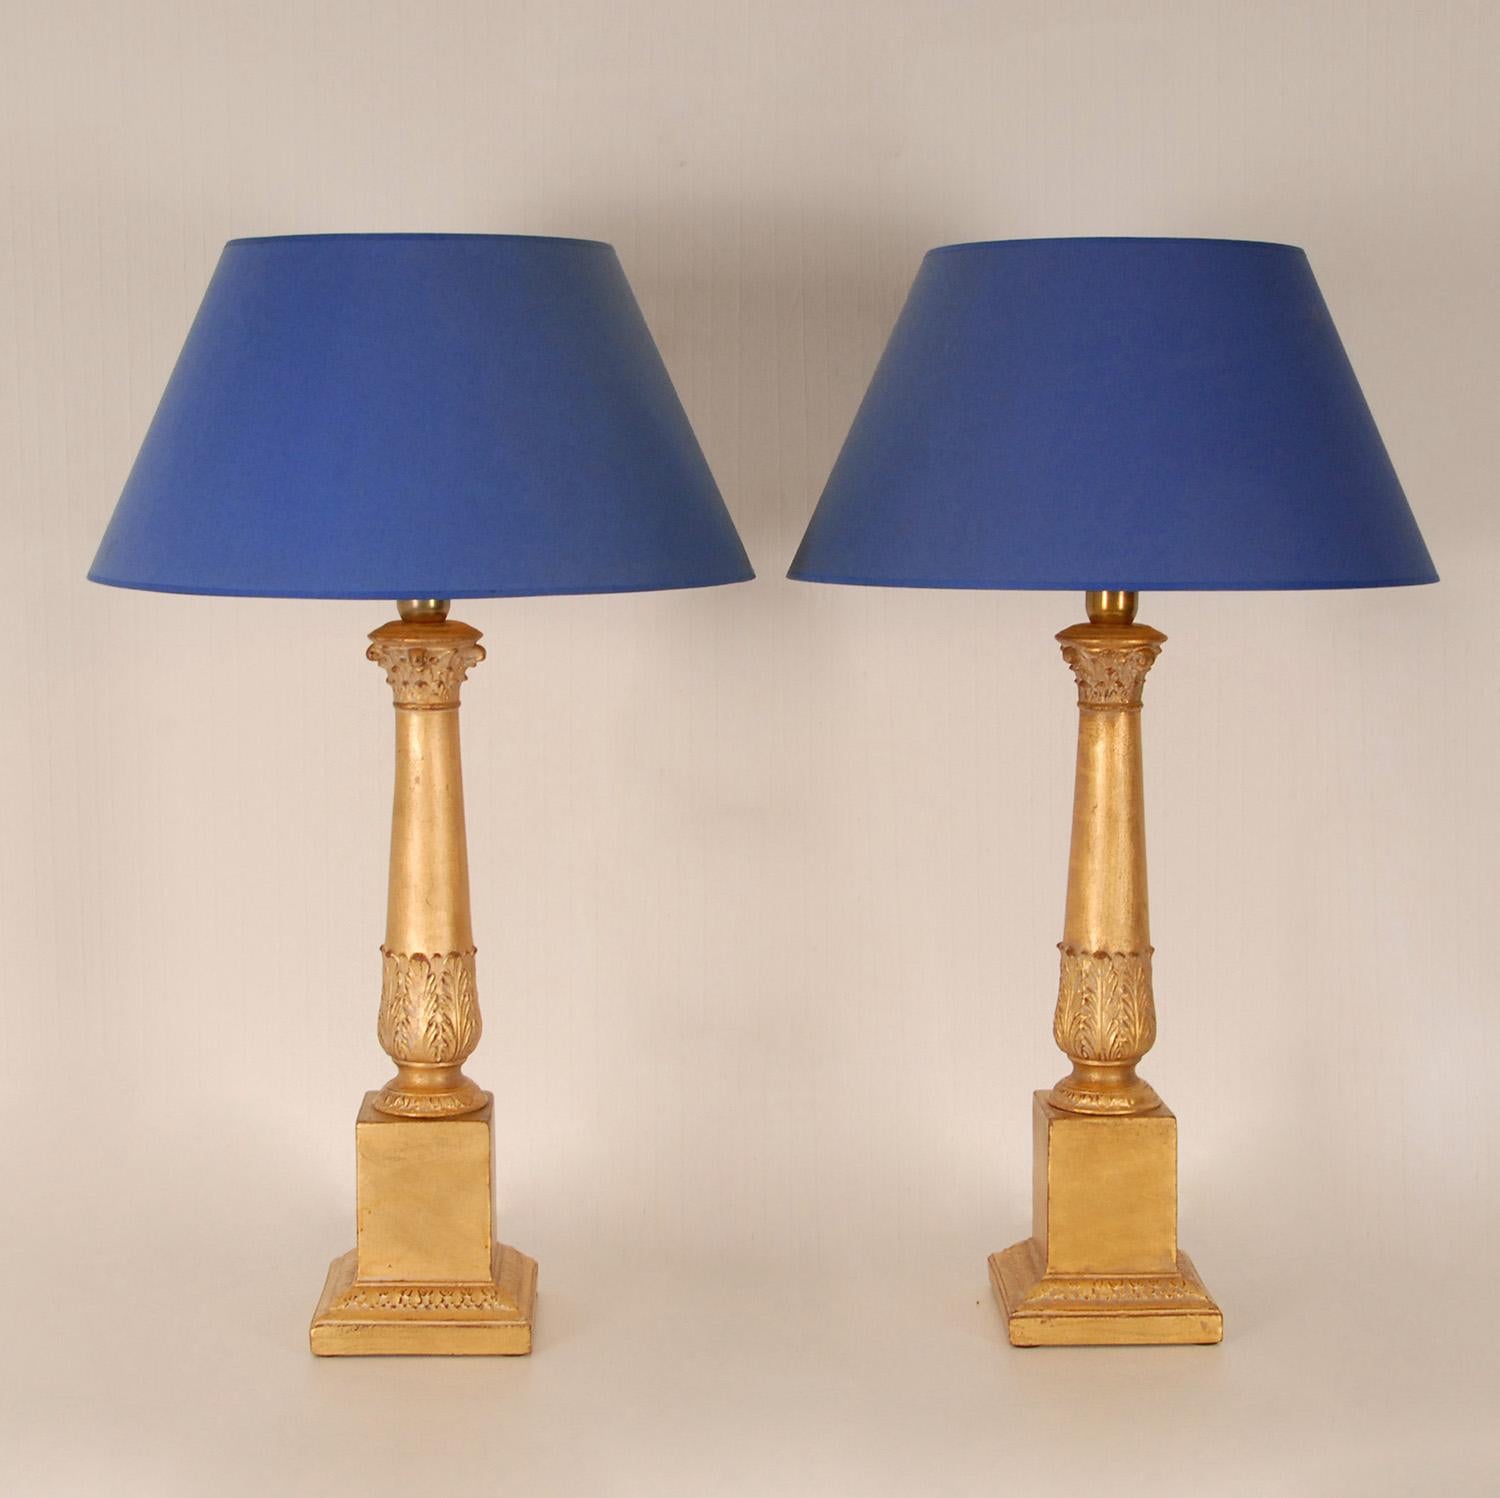 Vintage Italian Ceramic Lamps Gold Gilded Corinthian Column Table Lamps a Pair For Sale 5